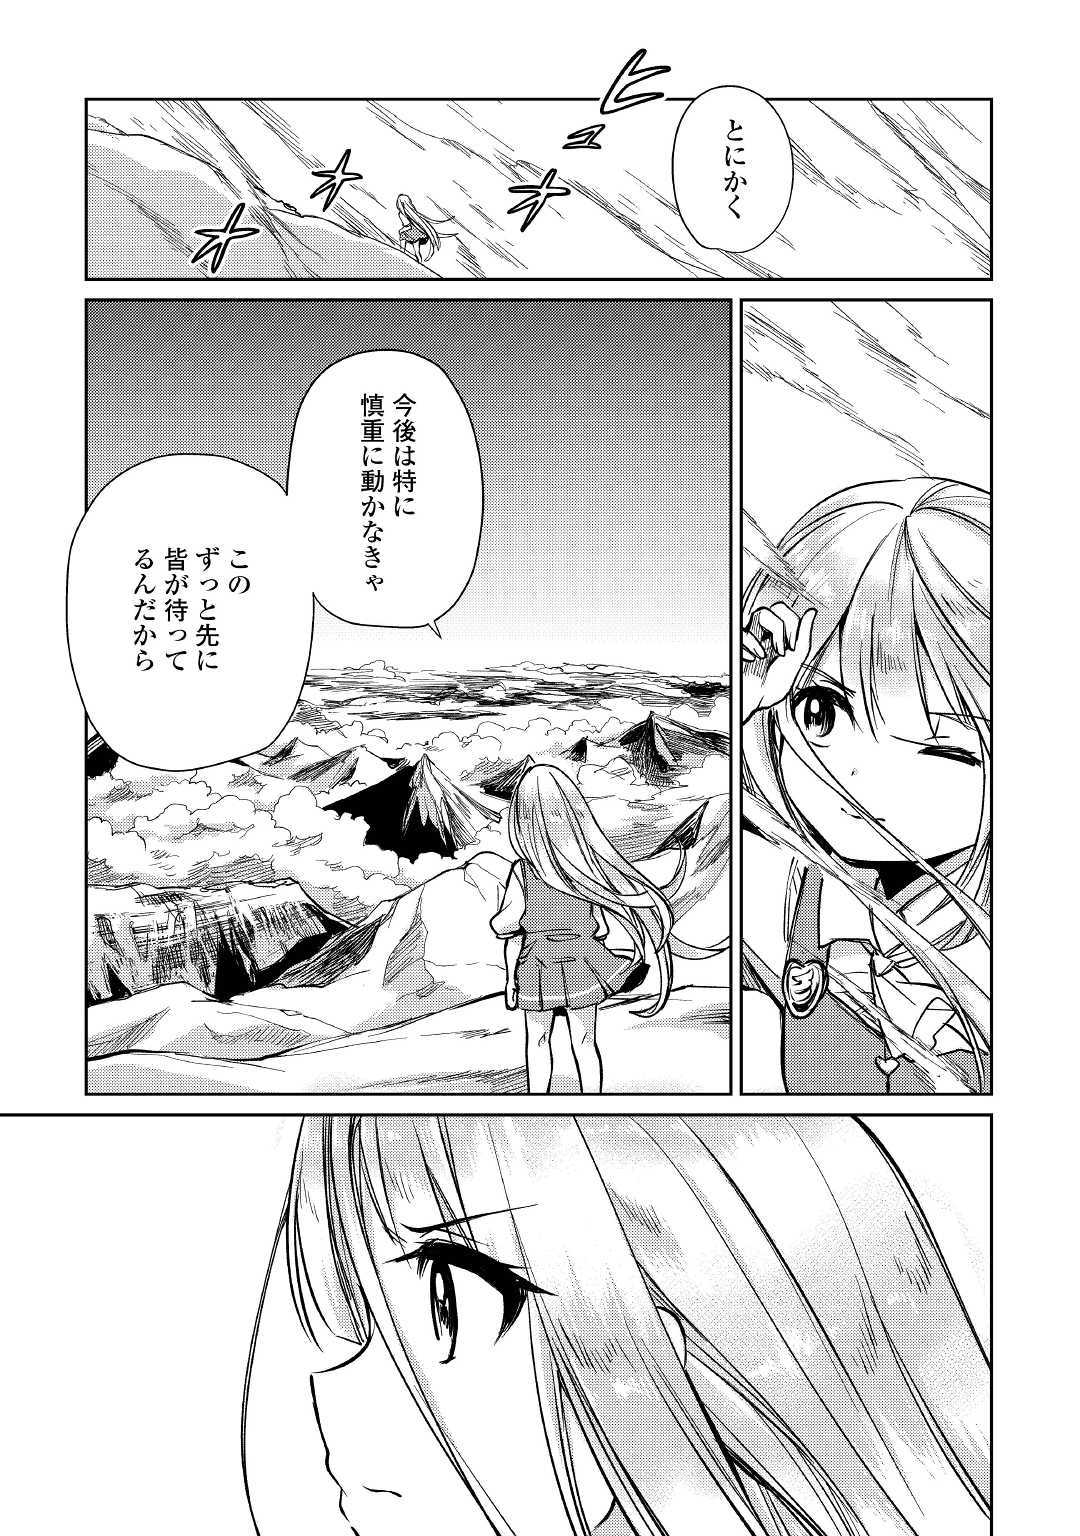 The Former Structural Researcher’s Story of Otherworldly Adventure 第13話 - Page 17